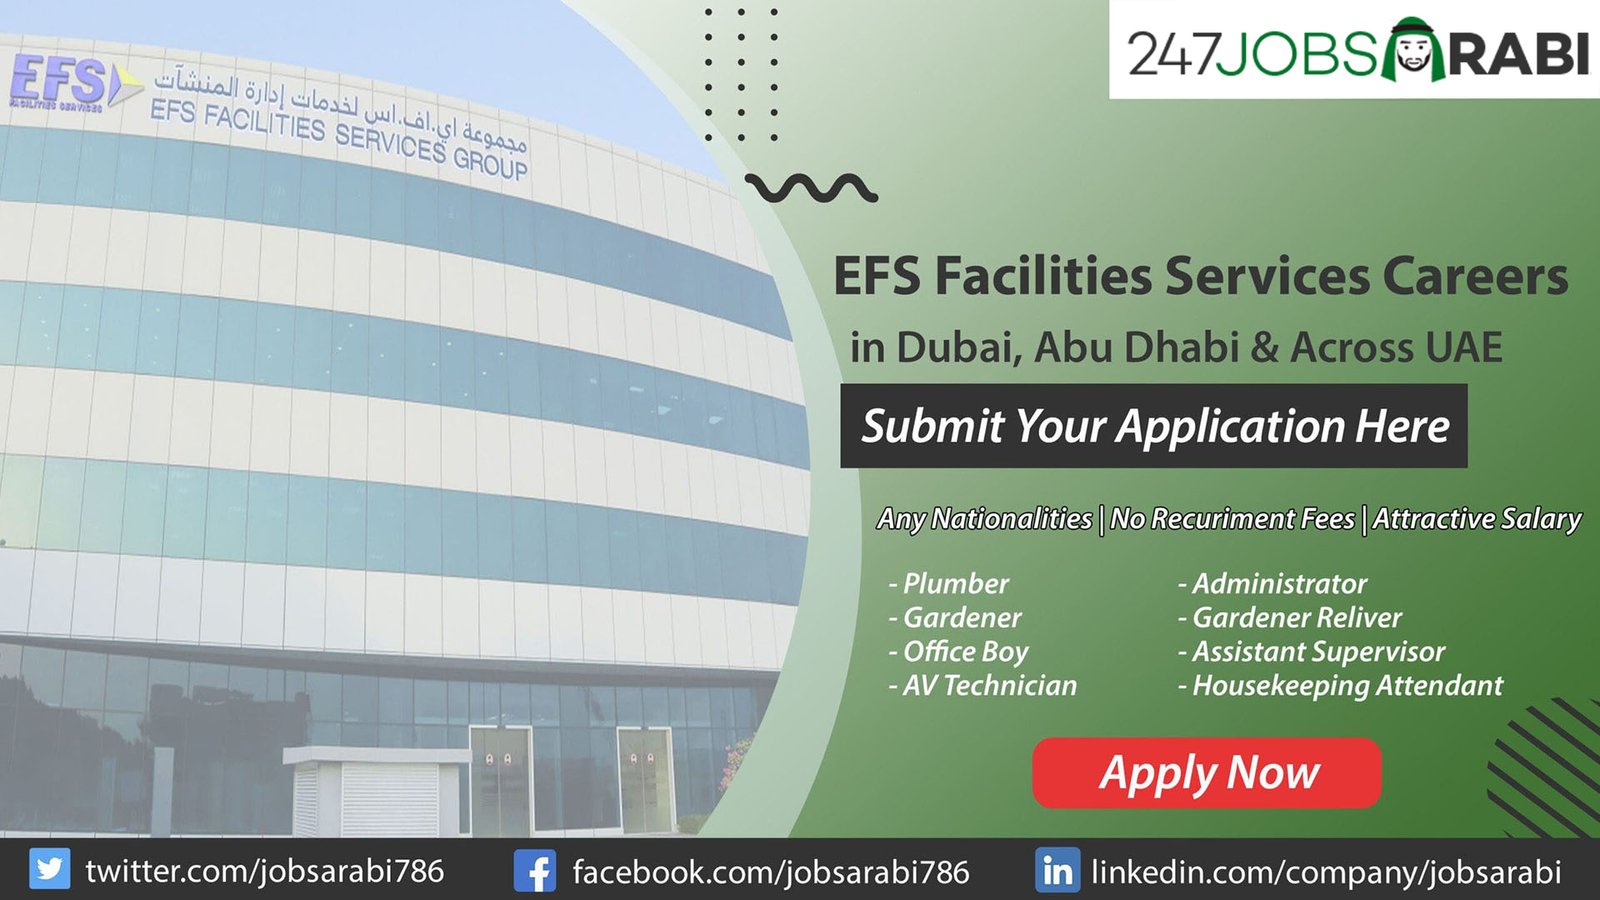 EFS Facilities Services Careers